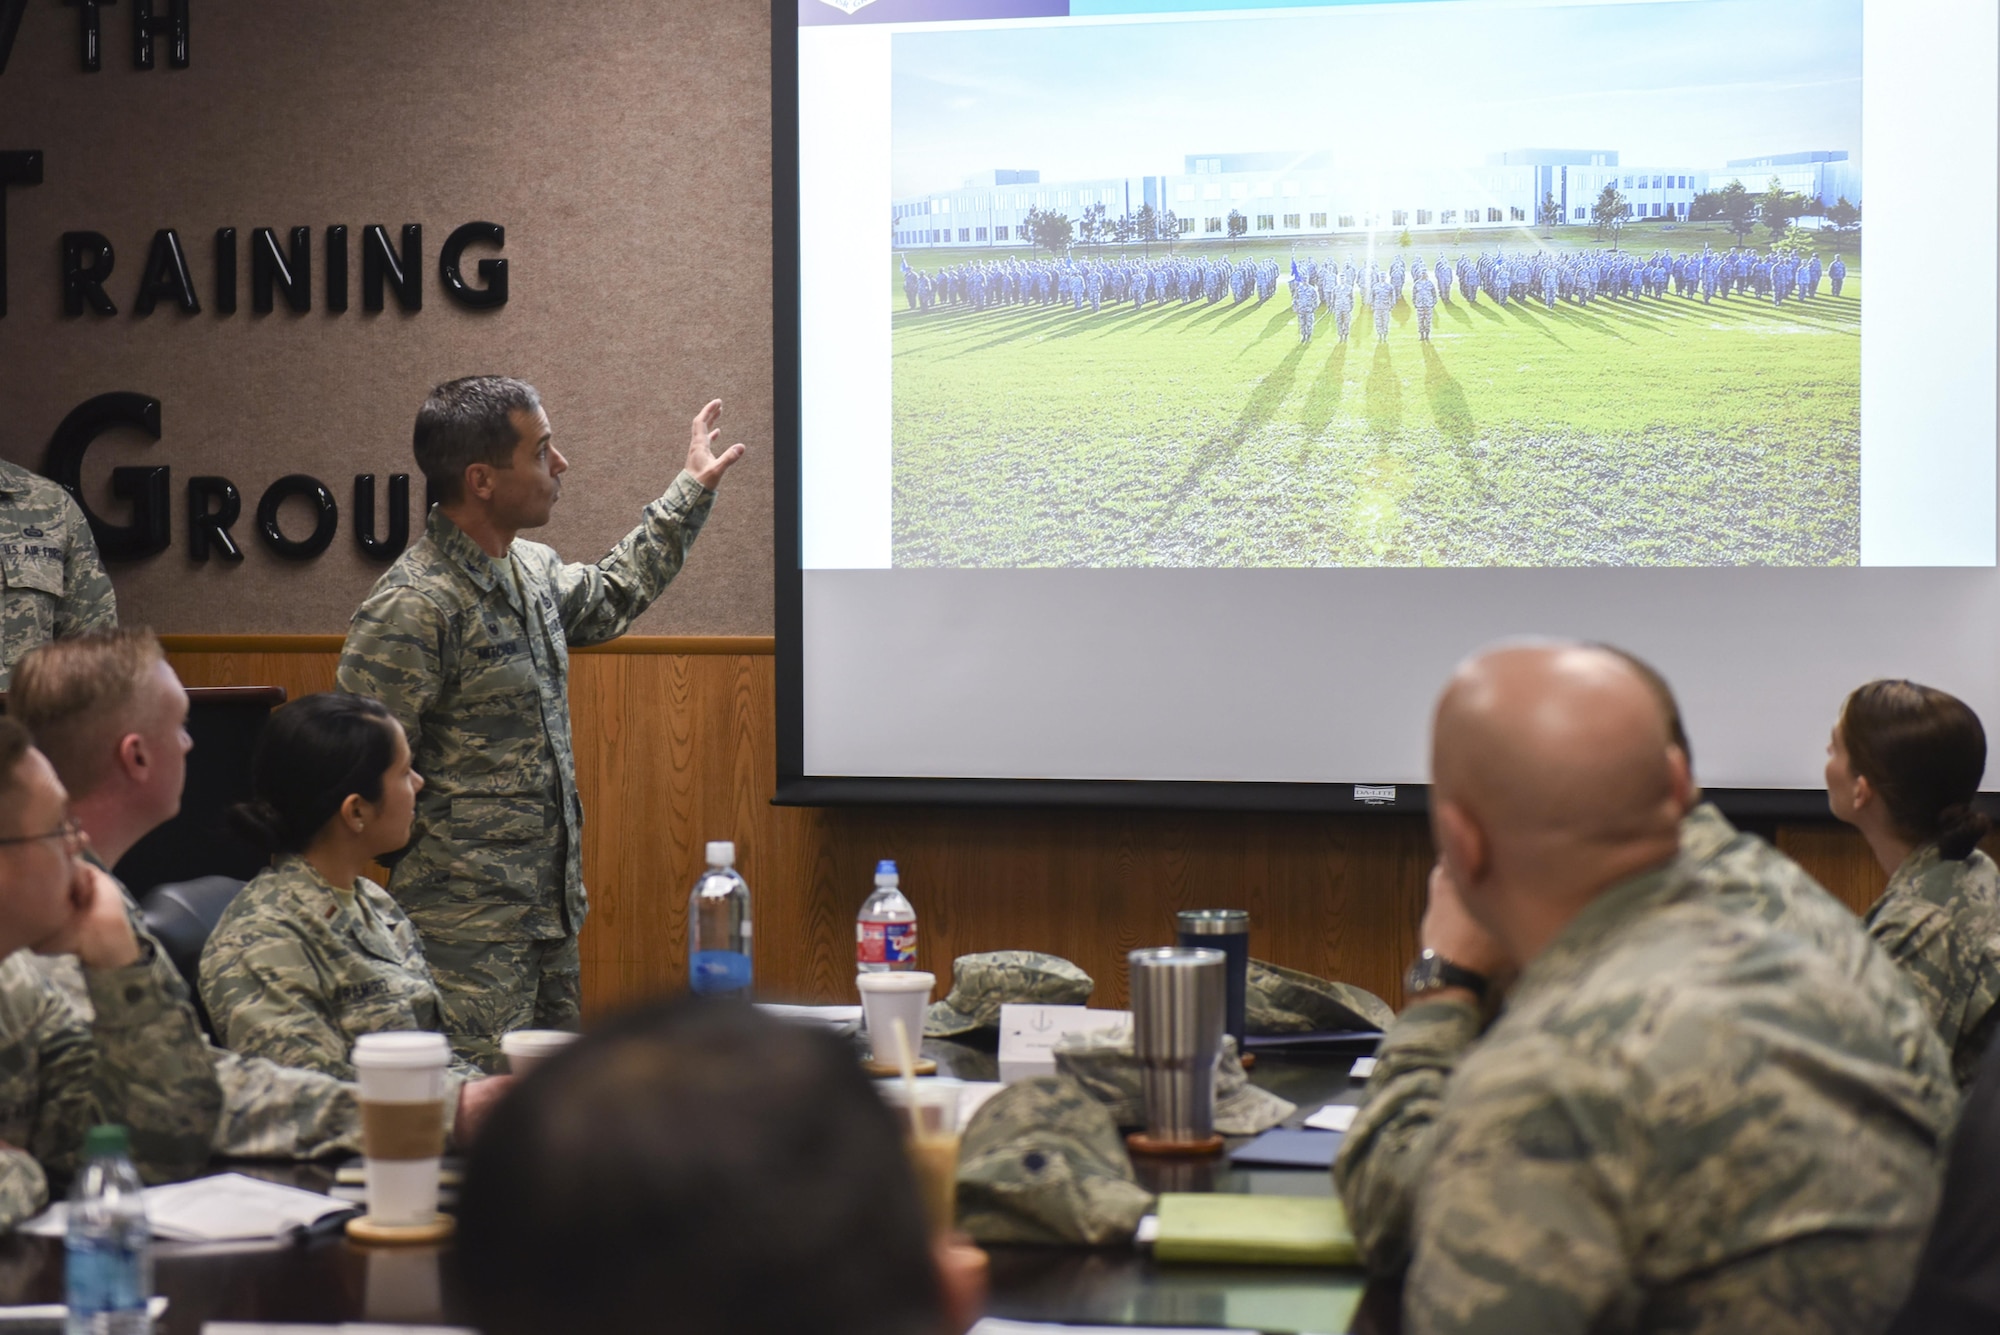 U.S. Air Force Col. Mark Mitchem, 480th Intelligence, Surveillance and Reconnaissance Group Commander, briefs Goodfellow members about the 480th ISR Group at the Brandenburg Hall on Goodfellow Air Force Base, Texas, Feb. 9, 2017. The 480th Intelligence, Surveillance and Reconnaissance Group is located at Fort Gordon in Georgia. (U.S. Air Force photo by Airman 1st Class Chase Sousa/Released)